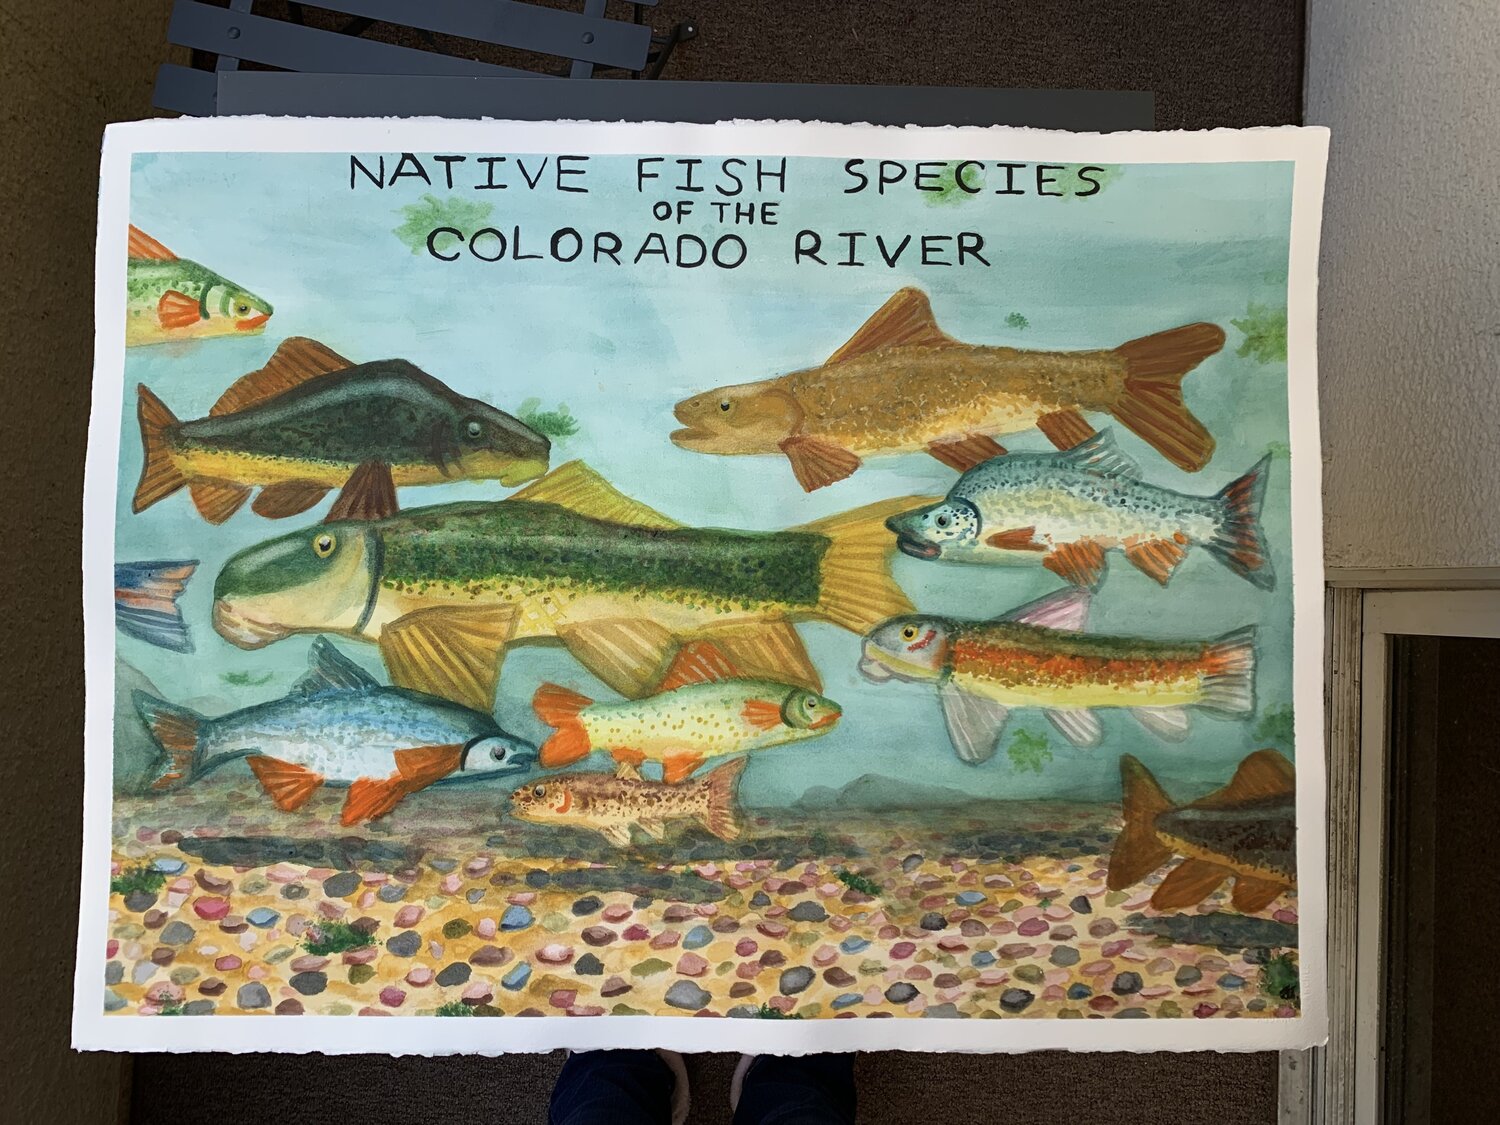 Taxonomy of Native Fish Species of the Colorado River